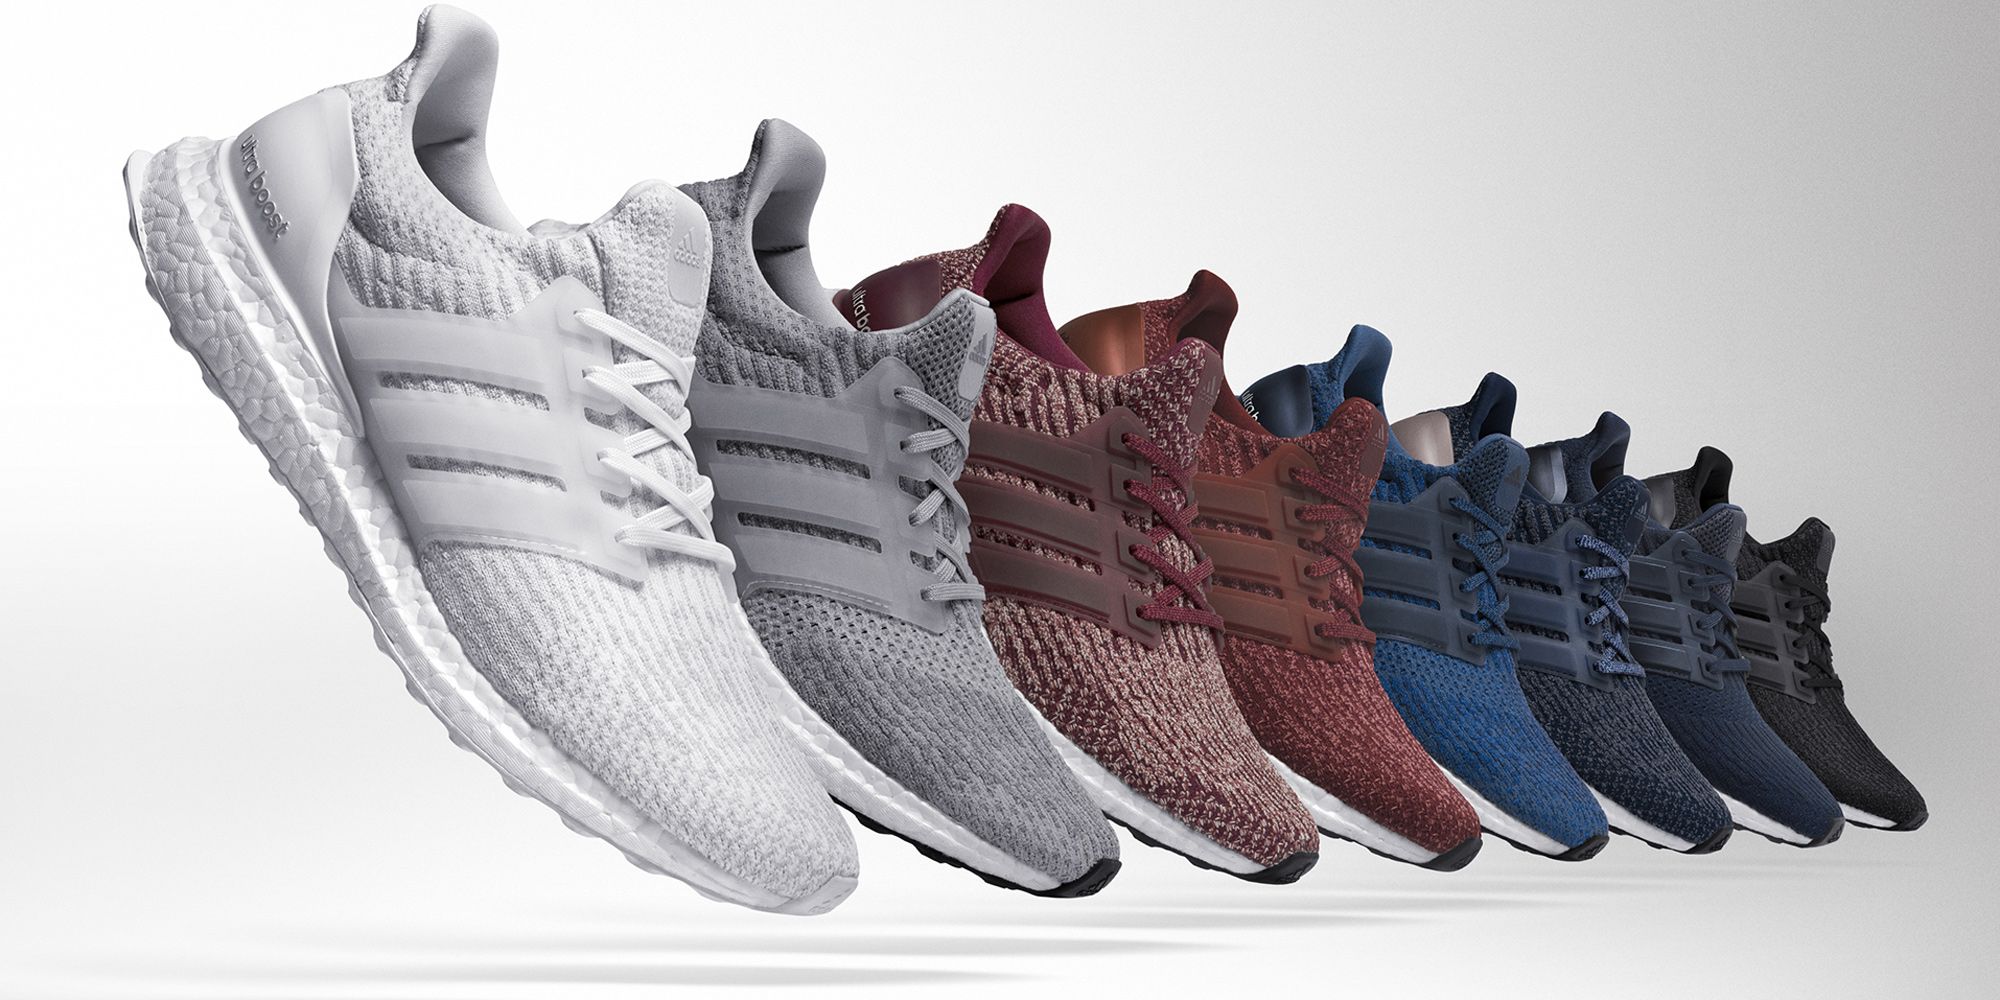 Adidas UltraBoost 3.0 Release Date - How to Get the New Ultra Boost 3.0